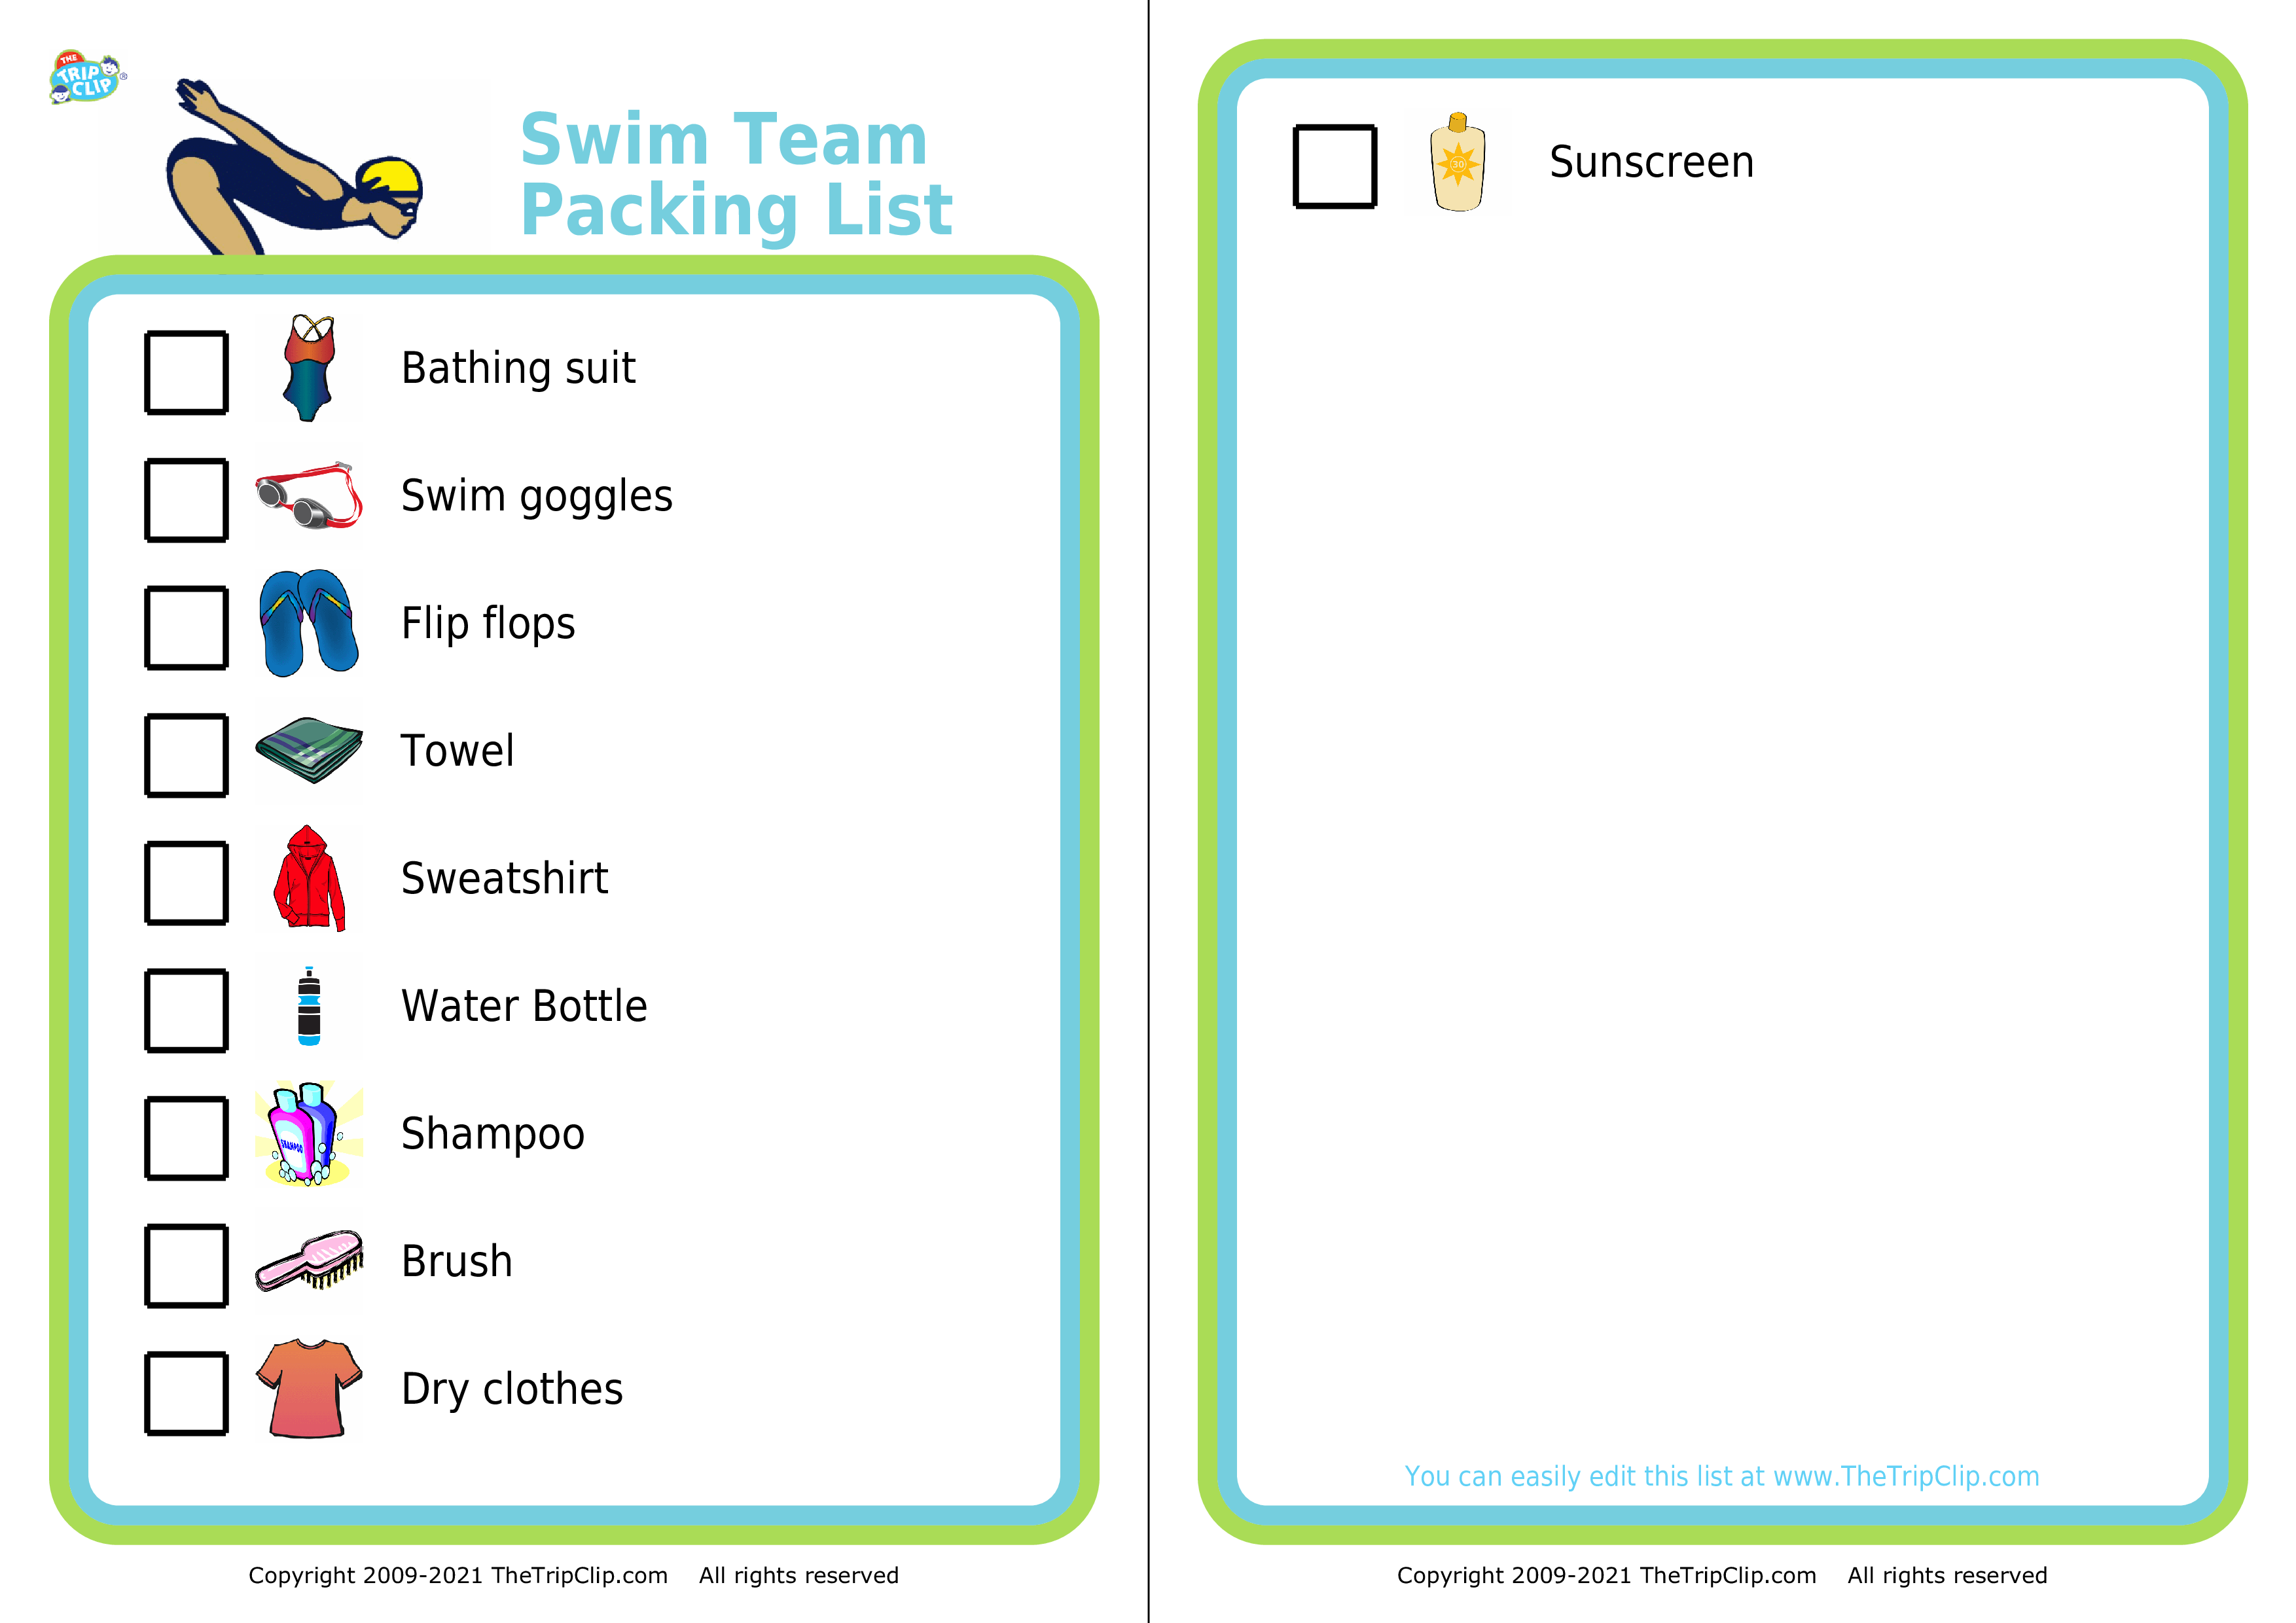 Picture checklist for making swim team packing list